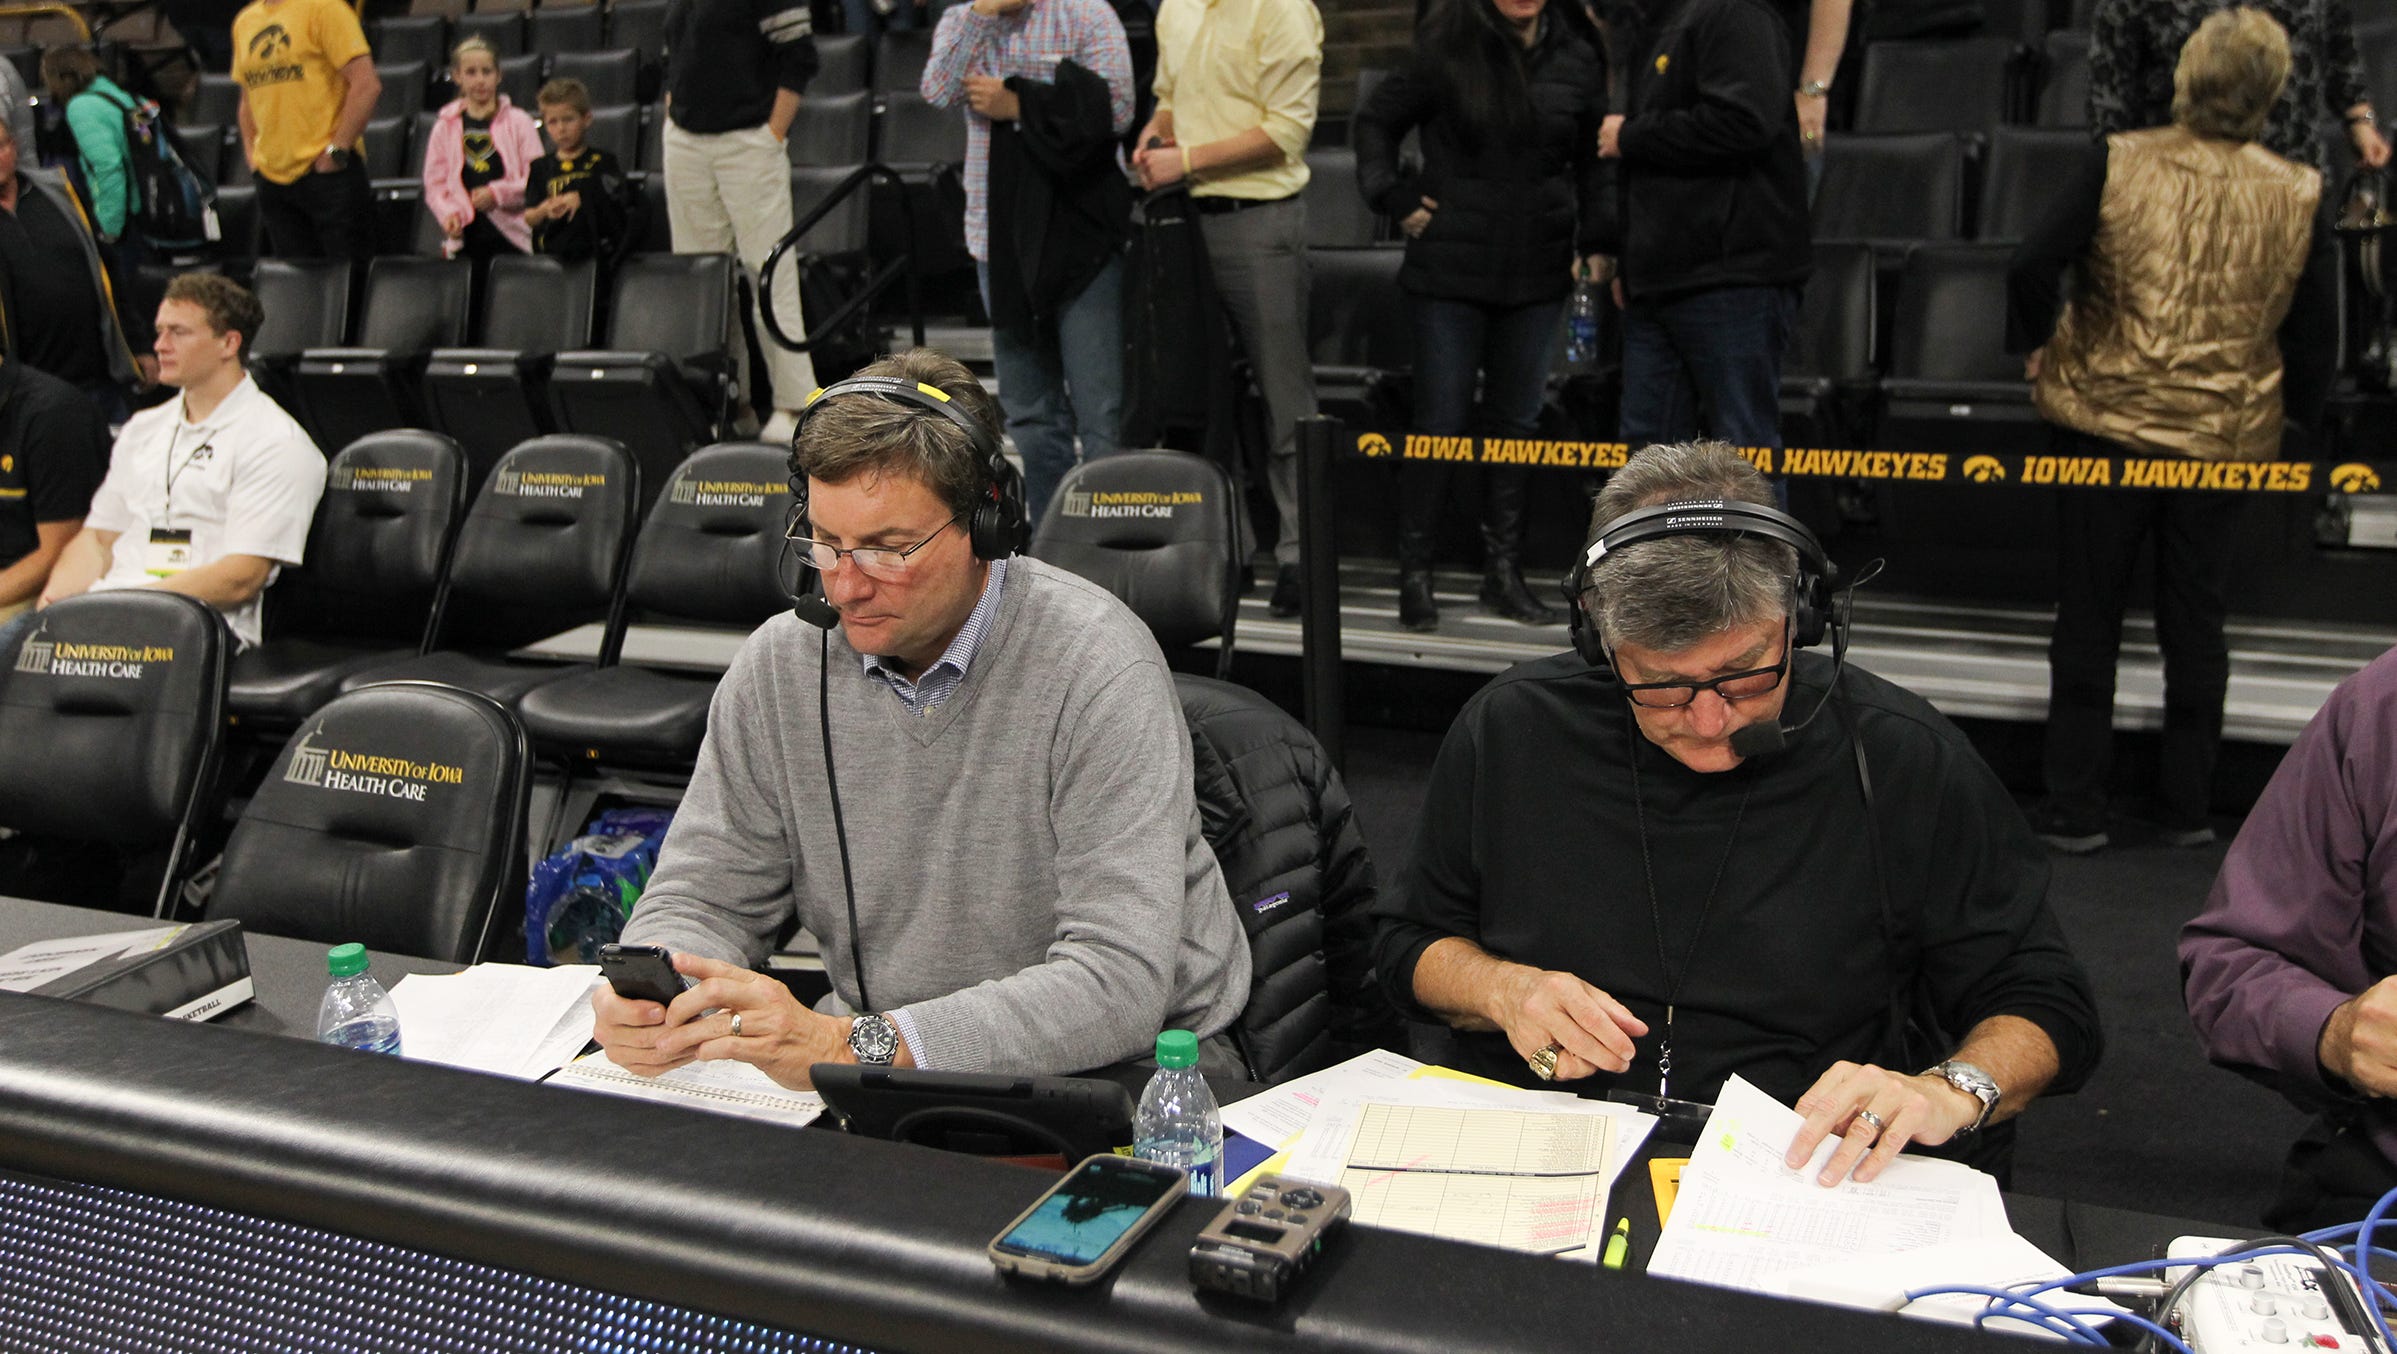 Bobby Hansen, left, and Gary Dolphin flip through notes after the Hawkeyes' game against Stetson at Carver-Hawkeye Arena on Monday, Dec. 5, 2016.